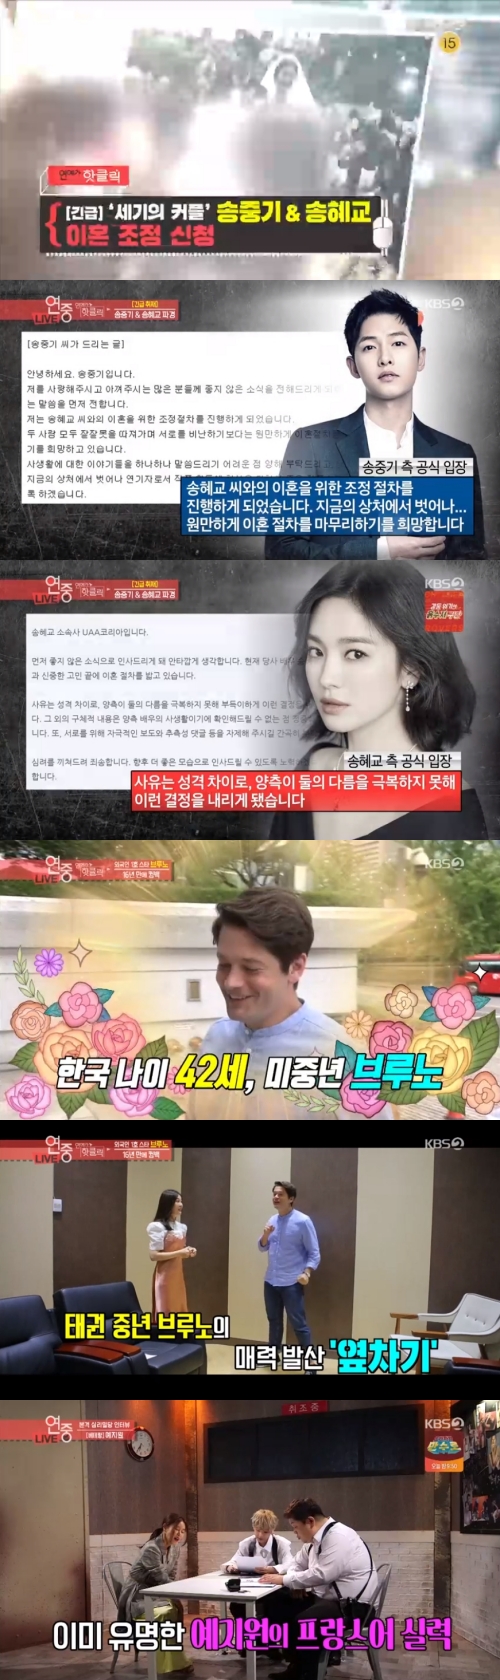 Entertainment Weekly Song Hye-kyo - Song Joong-ki couple broke down after a year and eight months of marriageOn the 28th KBS2 entertainment program Entertainment Weekly, the news of the divorce adjustment of Song Hye-kyo - Song Joong-ki couple was reported.On the day, Song Joong-ki received a divorce settlement application through a legal representative.Song Joong-ki - Song Hye-kyo couple quietly prepared for divorce without notifying their agency, and the agency also answered silently.The expert said, The reason for the divorce adjustment process seems to be aimed at minimizing media exposure.The divorce is a way for entertainer couples to use it because the two parties must attend at the same time, while the agent can go out and finish the trial early after the divorce mediation process.After the news of the divorce settlement was announced, the difference in the position posted by Song Hye-kyo - Song Joong-ki on SNS was also covered.Song Joong-ki said, I hope to get out of the wound and finish the divorce process smoothly. Song Hye-kyo said, The reason is because of the personality difference, and the two sides have not overcome the difference.Meanwhile, the Song Hye-kyo - Song Joong-ki couple married in October 2017 and called the couple of the century and focused public attention.The news of the two peoples misfortune has also caused the foreign media to see. In China, related search terms have exceeded 2 billion views.The news of the comeback of Brüno, the first foreign star, was followed.Brüno expressed his gratitude to Korea and KBS, which he visited in 16 years, and recalled his first visit to Korea. I learned Taekwondo for a while.I saw the picture at that time and it is a baby. Among them, Brünos fluent Korean language skills attracted attention. Brüno said, I was so pulled from Korean food that I went to Korean town.I had a lot of opportunities to make food in Korean and speak in Korea. In addition, Brüno has been acting in Germany for six years, and has set up a Korean fusion restaurant.I wanted to eat Korean food and Korean friends wanted to make it. The kitchen friends were all Korean people. Finally, Brüno said, I do not know what will happen because I am still acting in Germany, but I hope I can go back and forth. I hope I can take a drama in Korea.The Korean Loves Entertainment Couple Stars were released.Yoo Tae - Kim Hyo-jin and Choi Min-soo - Kang Joo-eun couple, Pang Hyun-sook - Choi Yang-rak couple, Kim So-hyun - Son Jun-ho couple, Woo Hyo-kwang - Chu Ja-hyun couple, Ahn Jung-hwan - Lee Hye-won couple, Lee Jae-ryong - Yoo Ho-jung couple,In addition, YGs suspicion of sexual favor, Jung Jun-young - Choi Jong-hoons full-scale denial of sexual assault, and Bucheon International Fantastic Film Festival opening news were discussed.In the corner of Stars House, interviews with actors Choi Jung Won, Hong Ji Min, Park Jun-myeon and Luna of the musical Mamma Mia were drawn. In the Veteran corner, interviews with actress Ye Ji Won were revealed.Finally, interviews with movie actors were also reported.Following interviews with actors Song Kang-ho, Park Hae-il and Jeon Mi-sun of the movie Naratmal Sami, local interviews with Charlize Theron and Seth Logan of the movie Long Shot were revealed and attracted attention.